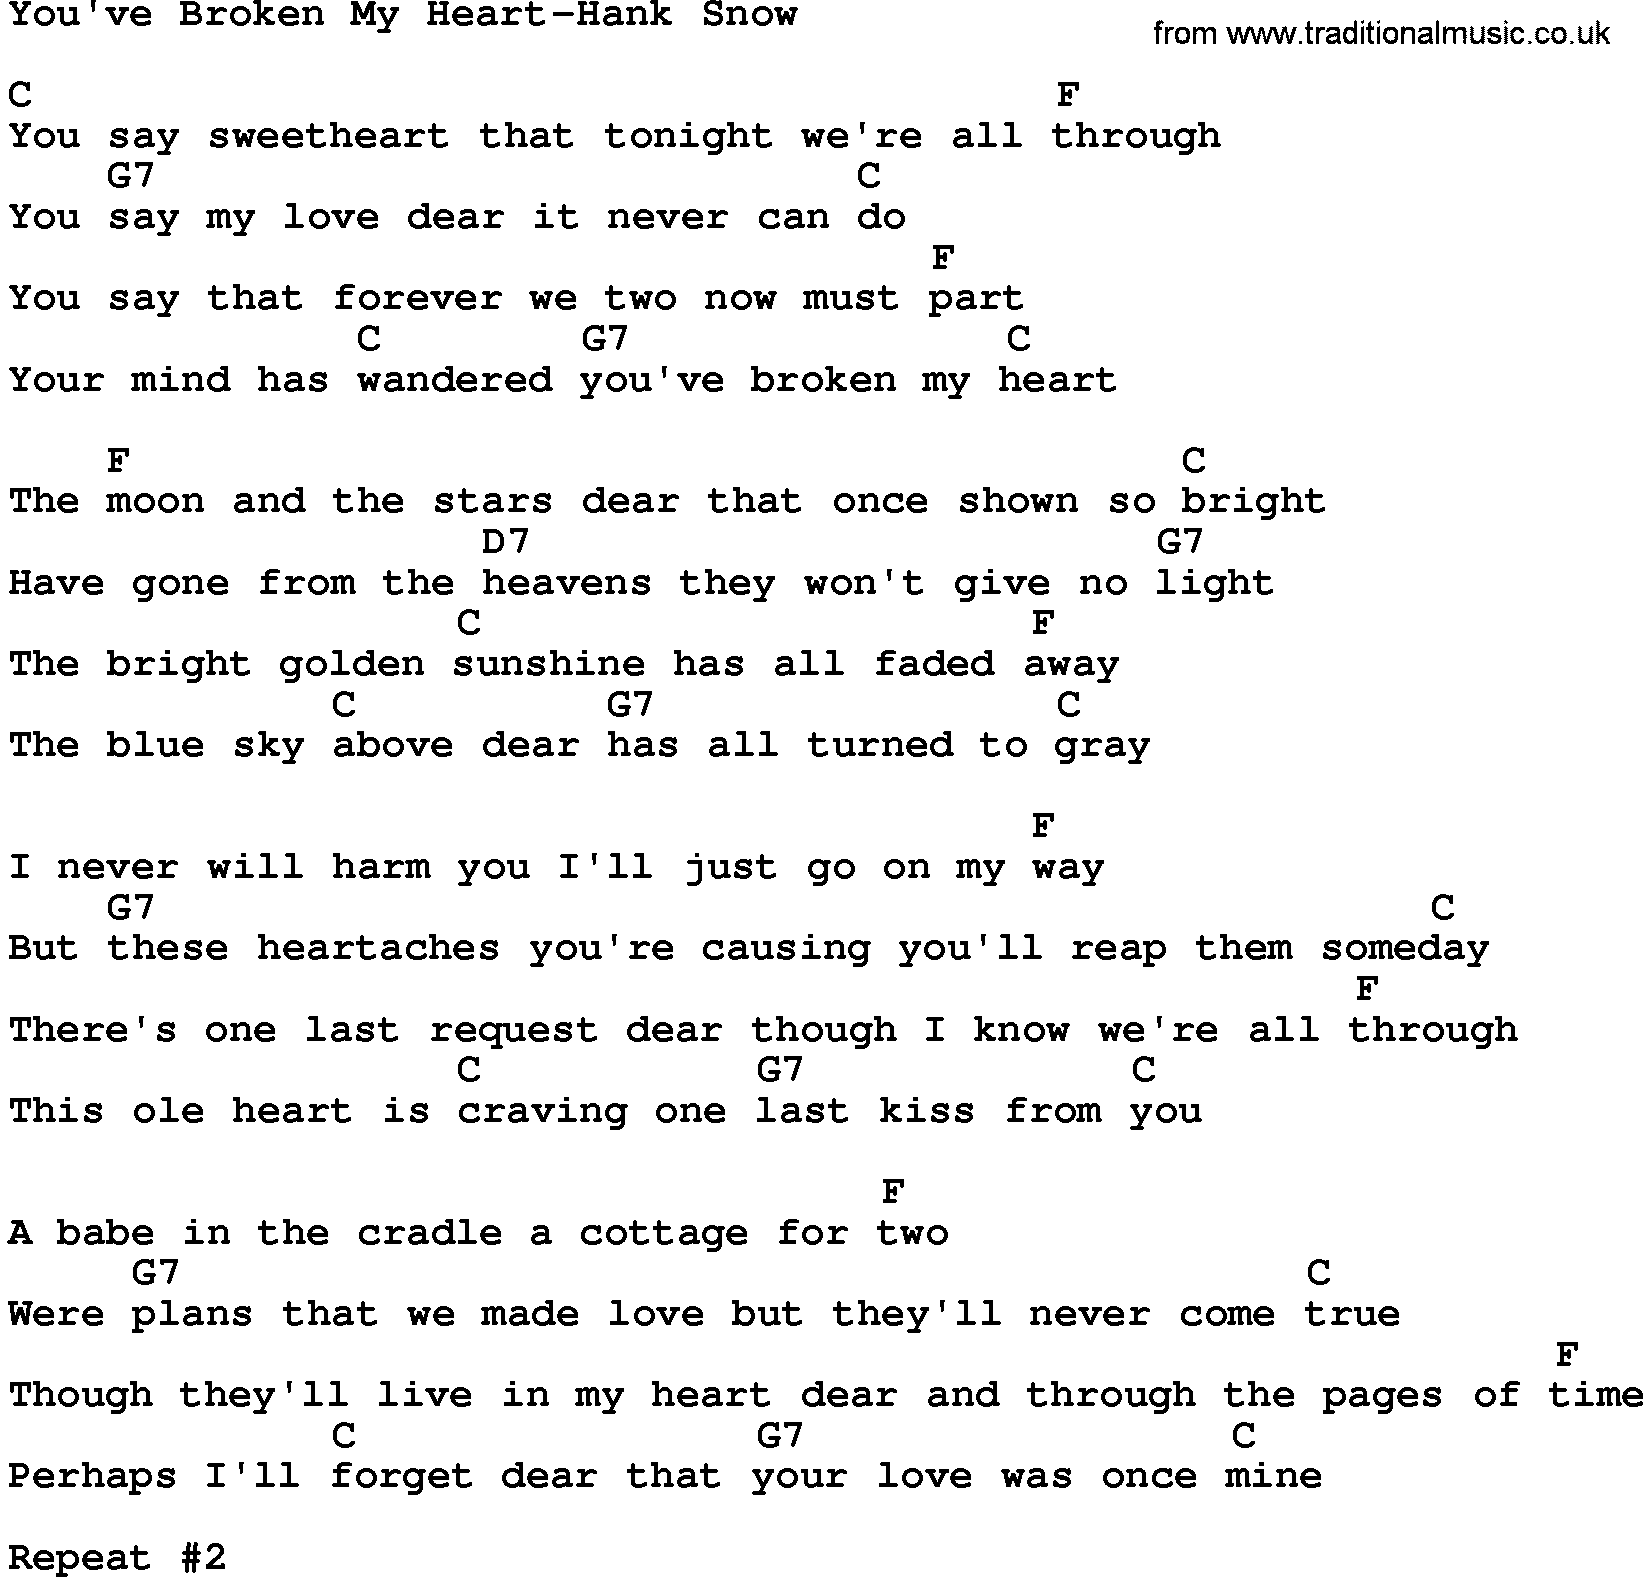 Country music song: You've Broken My Heart-Hank Snow lyrics and chords